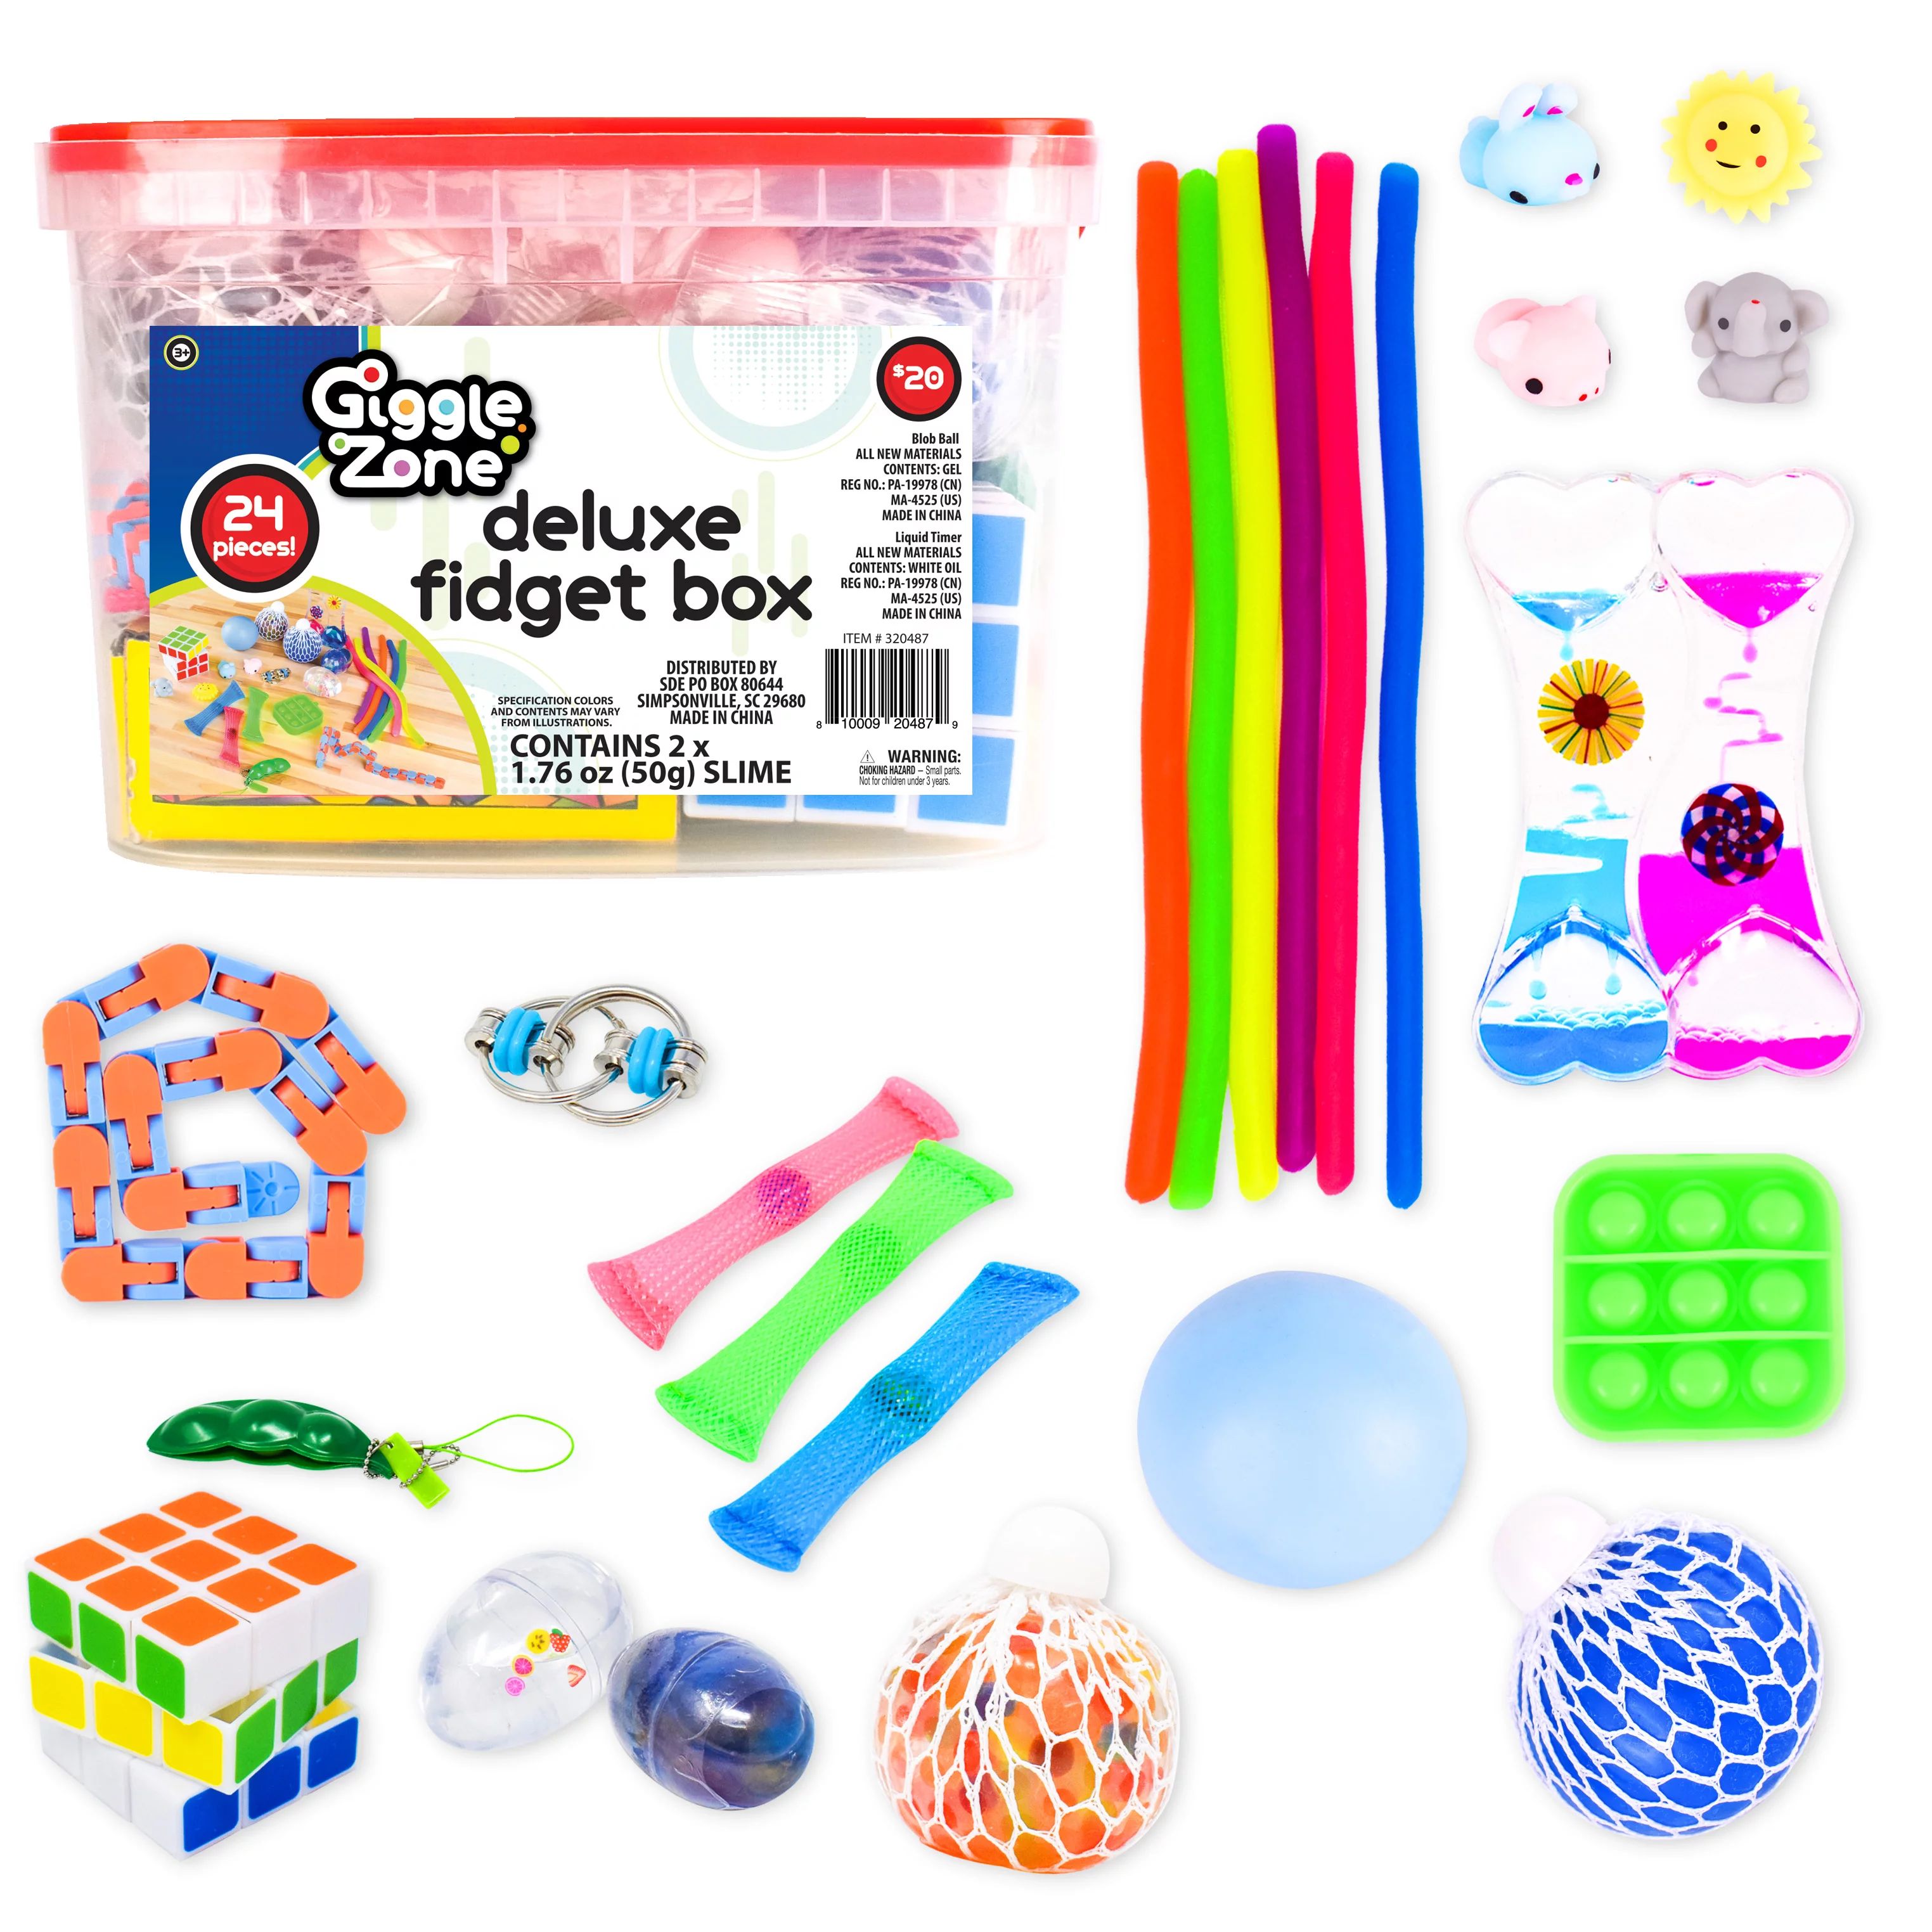 Giggle Zone 24 Piece Fidget Box Novelty Toys, Squish Characters with Storage Container - Walmart.... | Walmart (US)